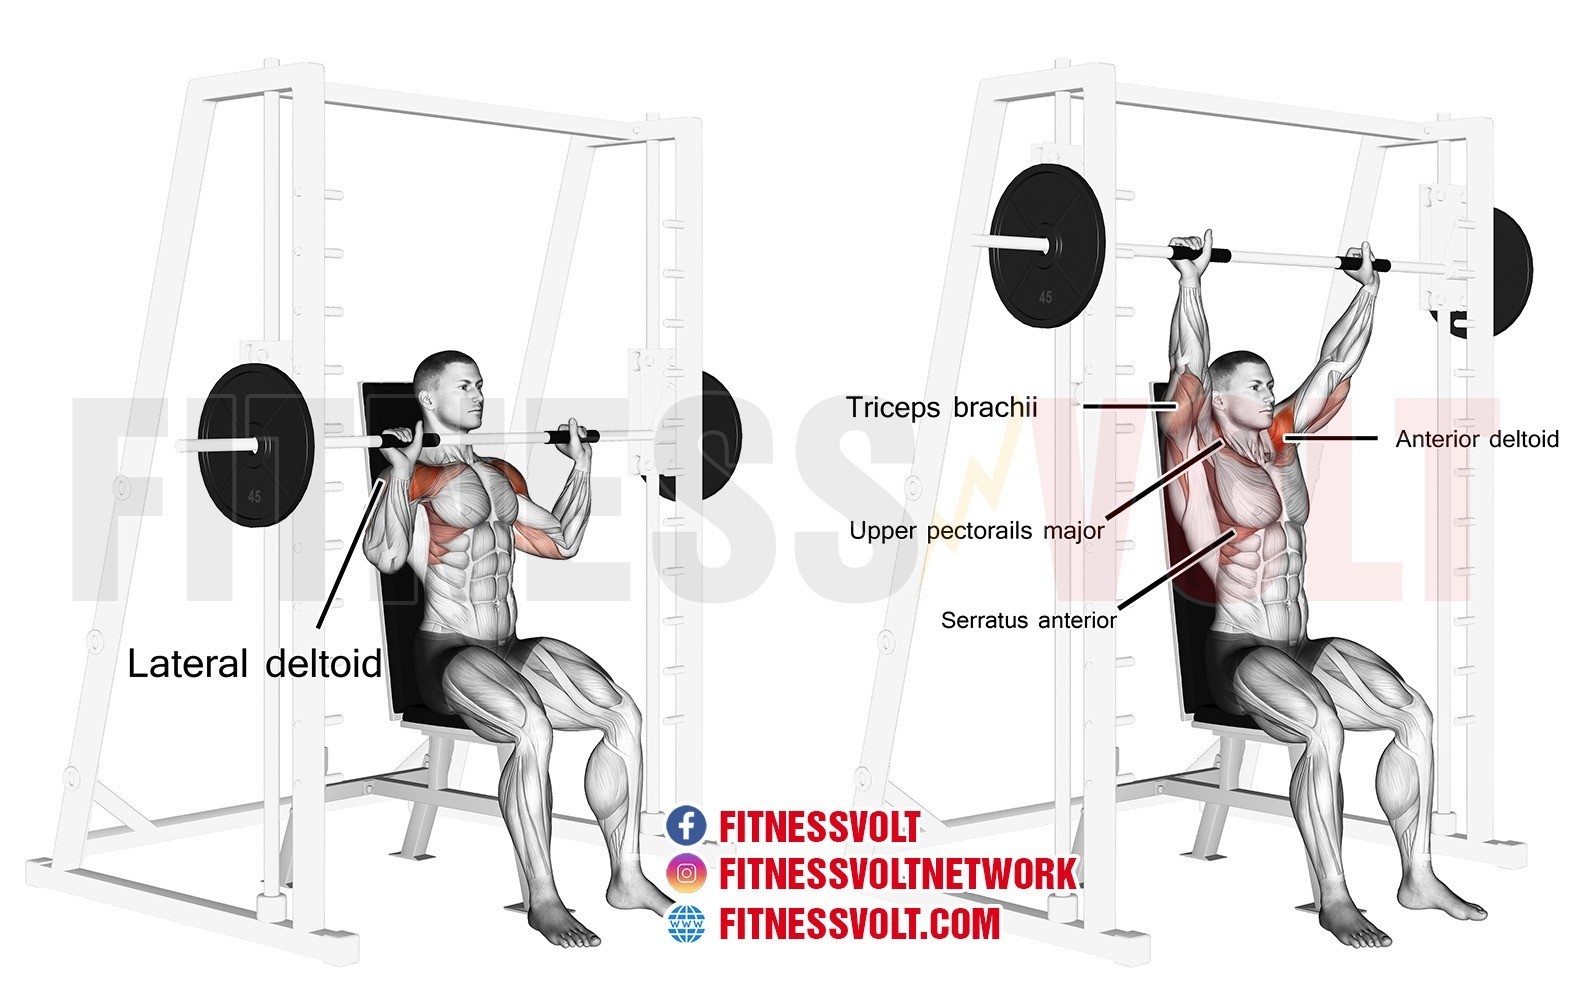 19 30 Minute Is smith machine bad for shoulders Workout at Gym